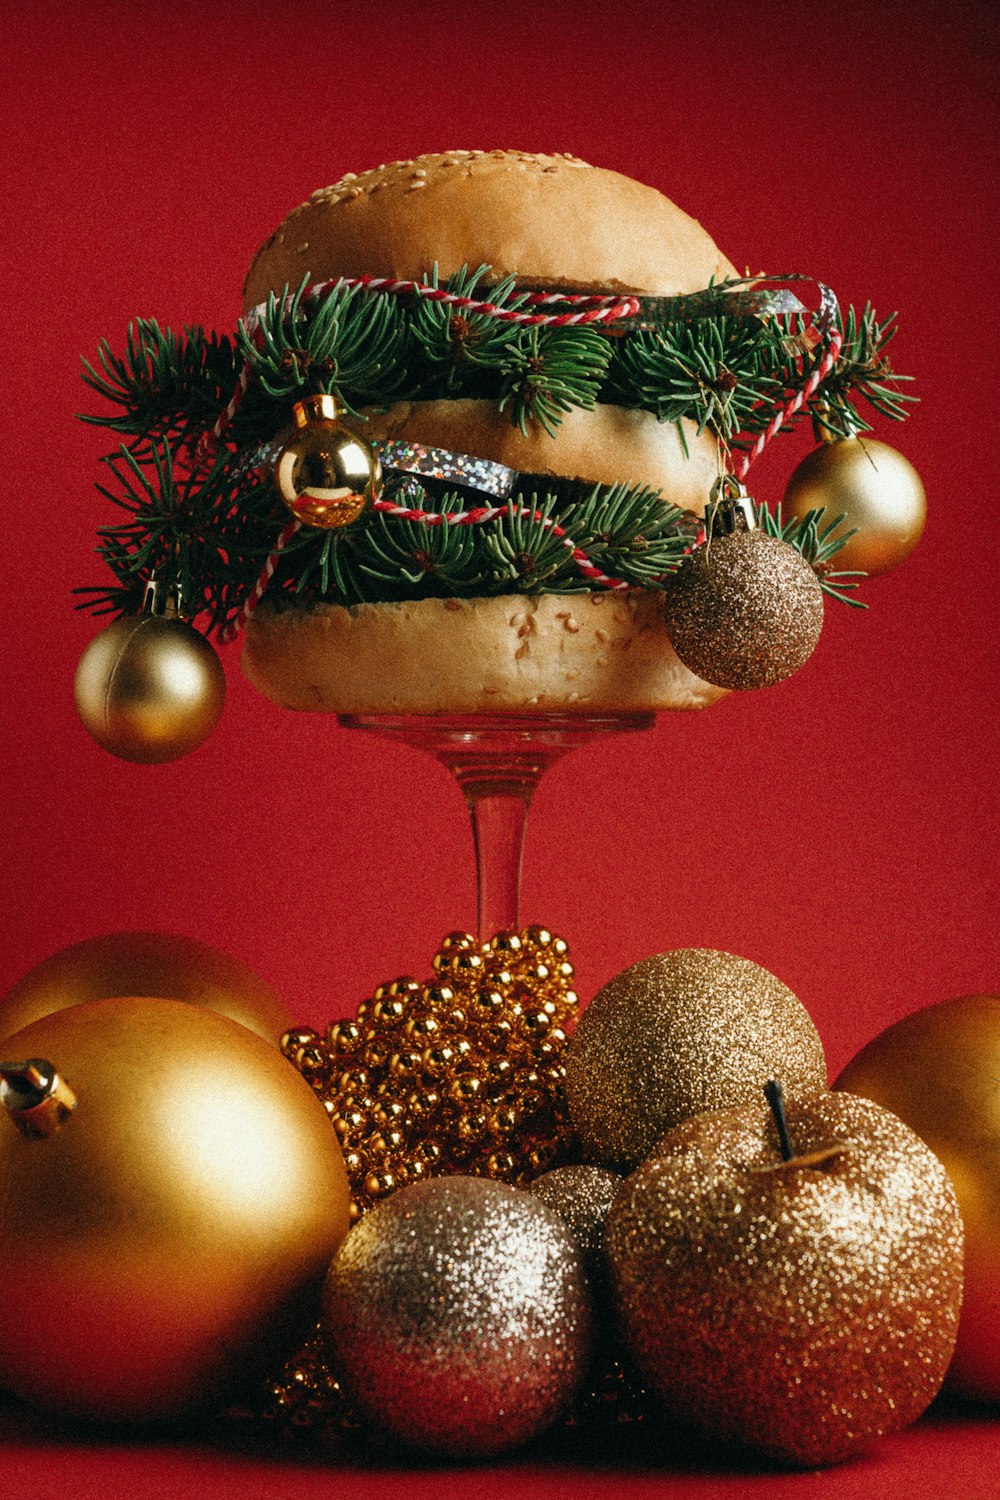 a hamburger and christmas ornaments on a red background